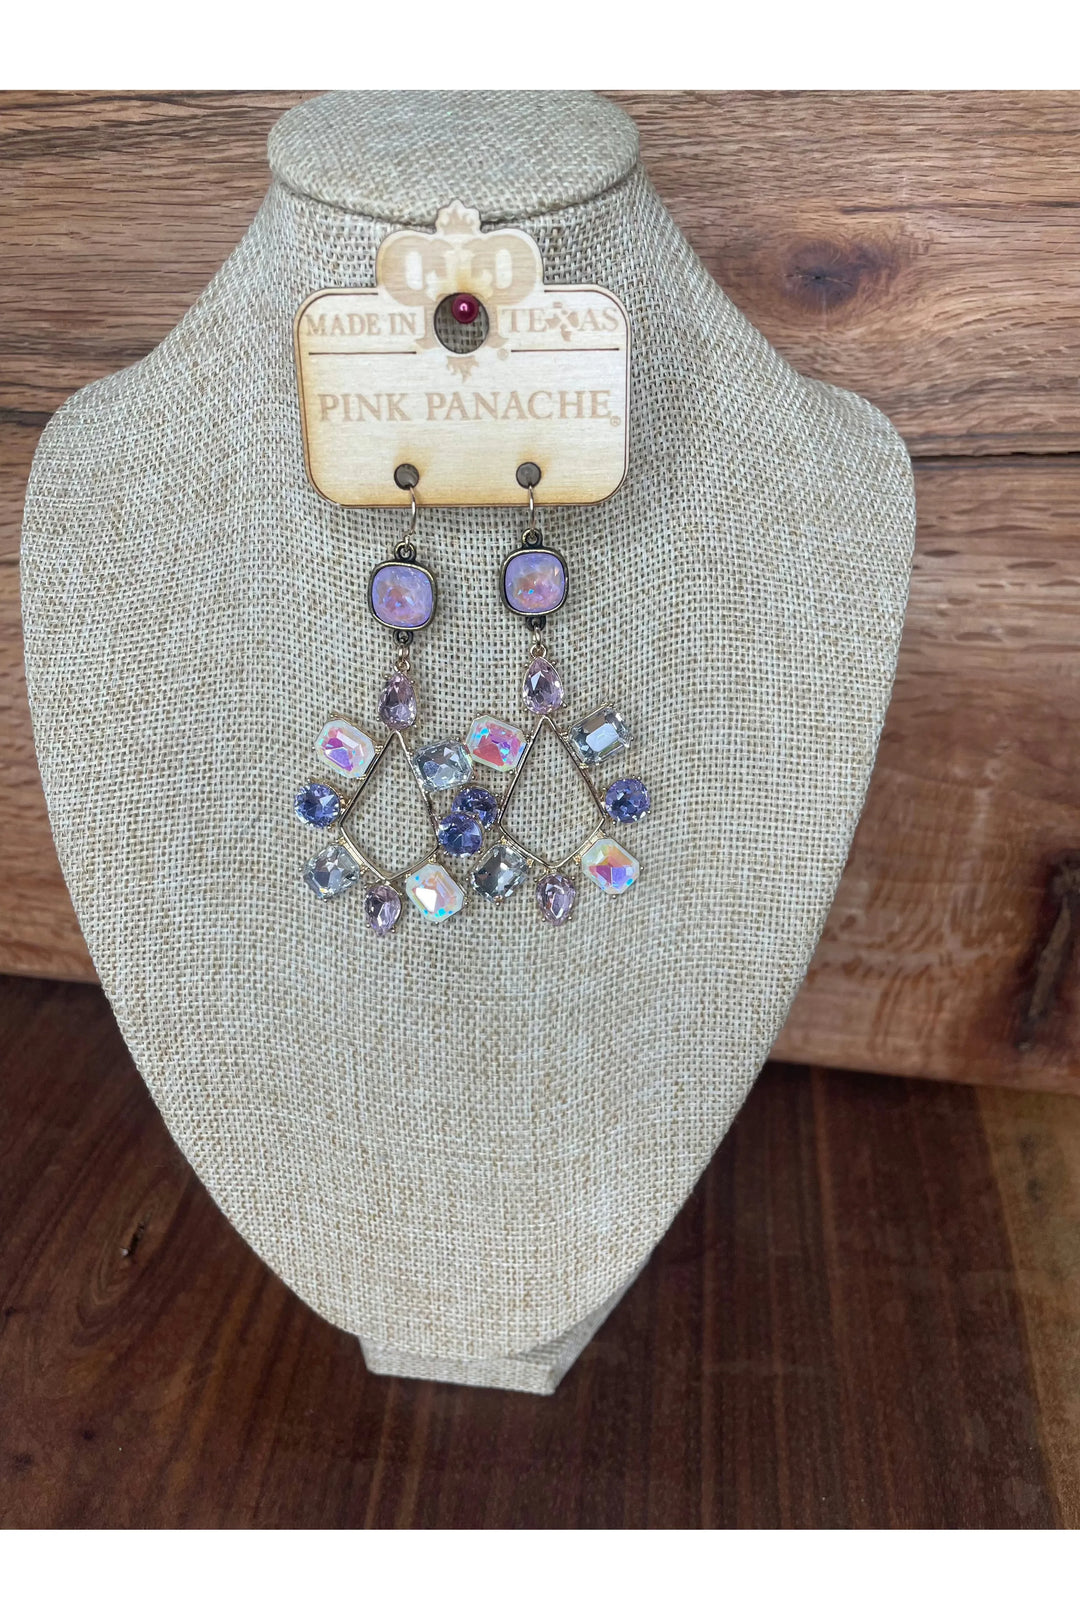 Pink Panache - Purple Crystal Dangle Earrings by Pink Panache - Vintage Dragonfly